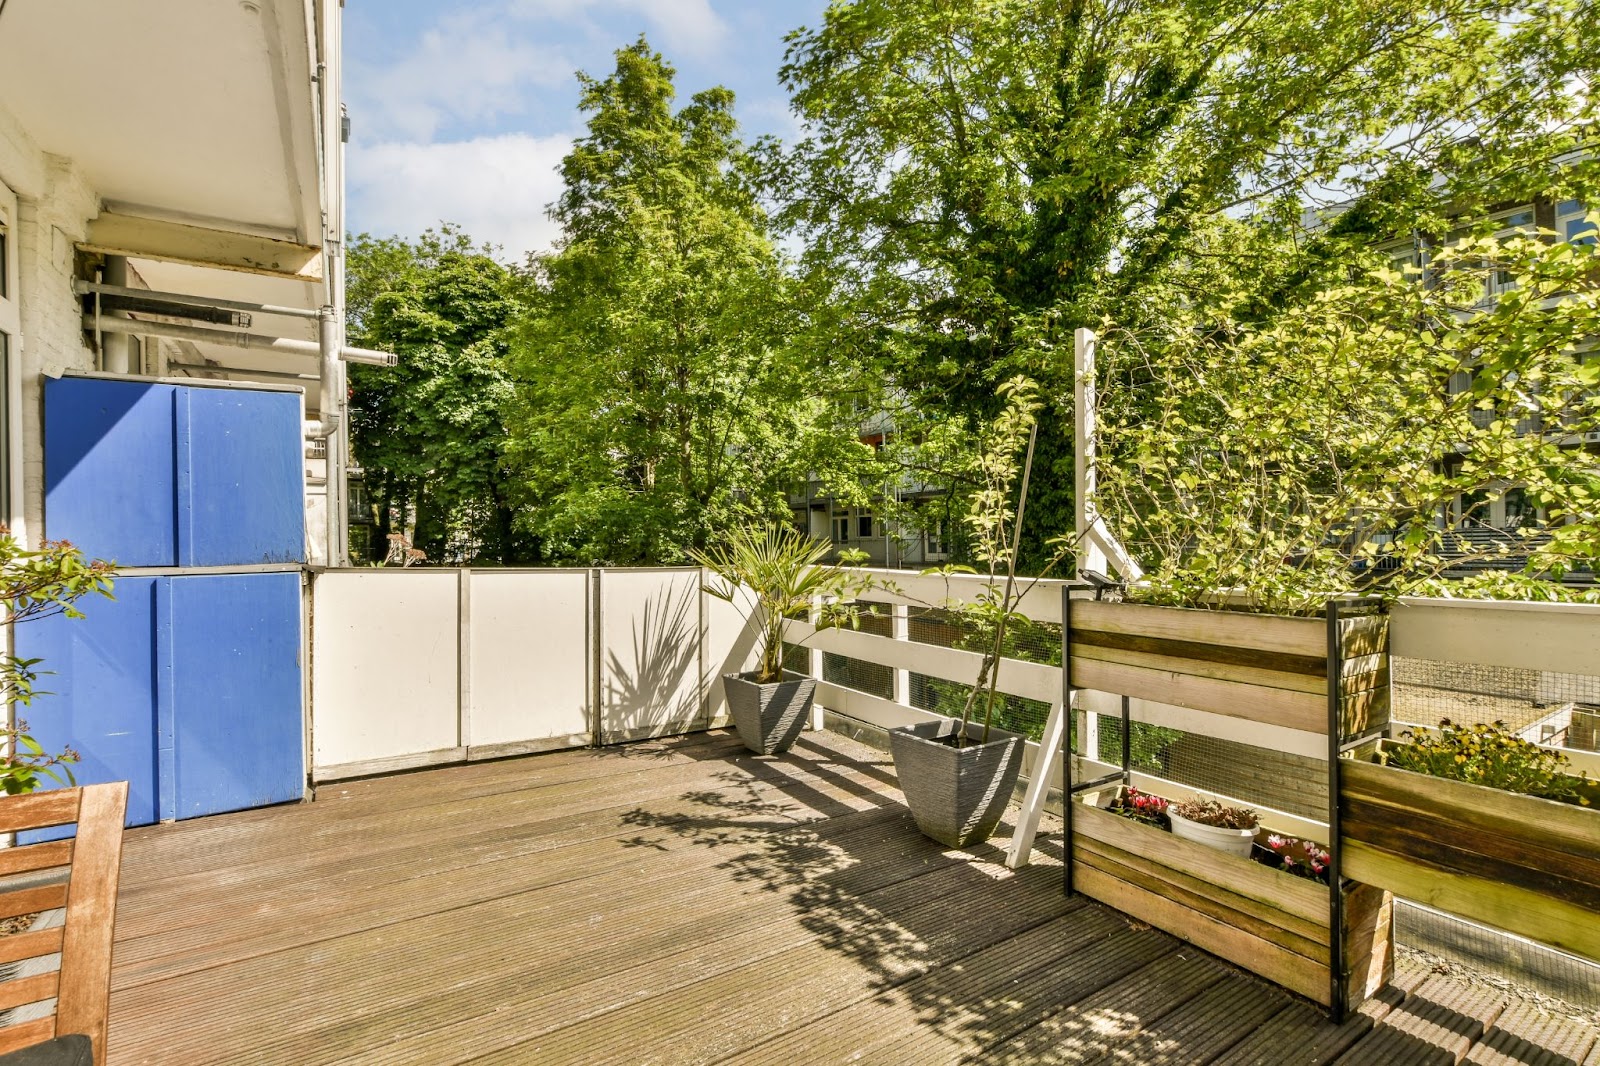 A wooden deck with wood railings and potted plants.